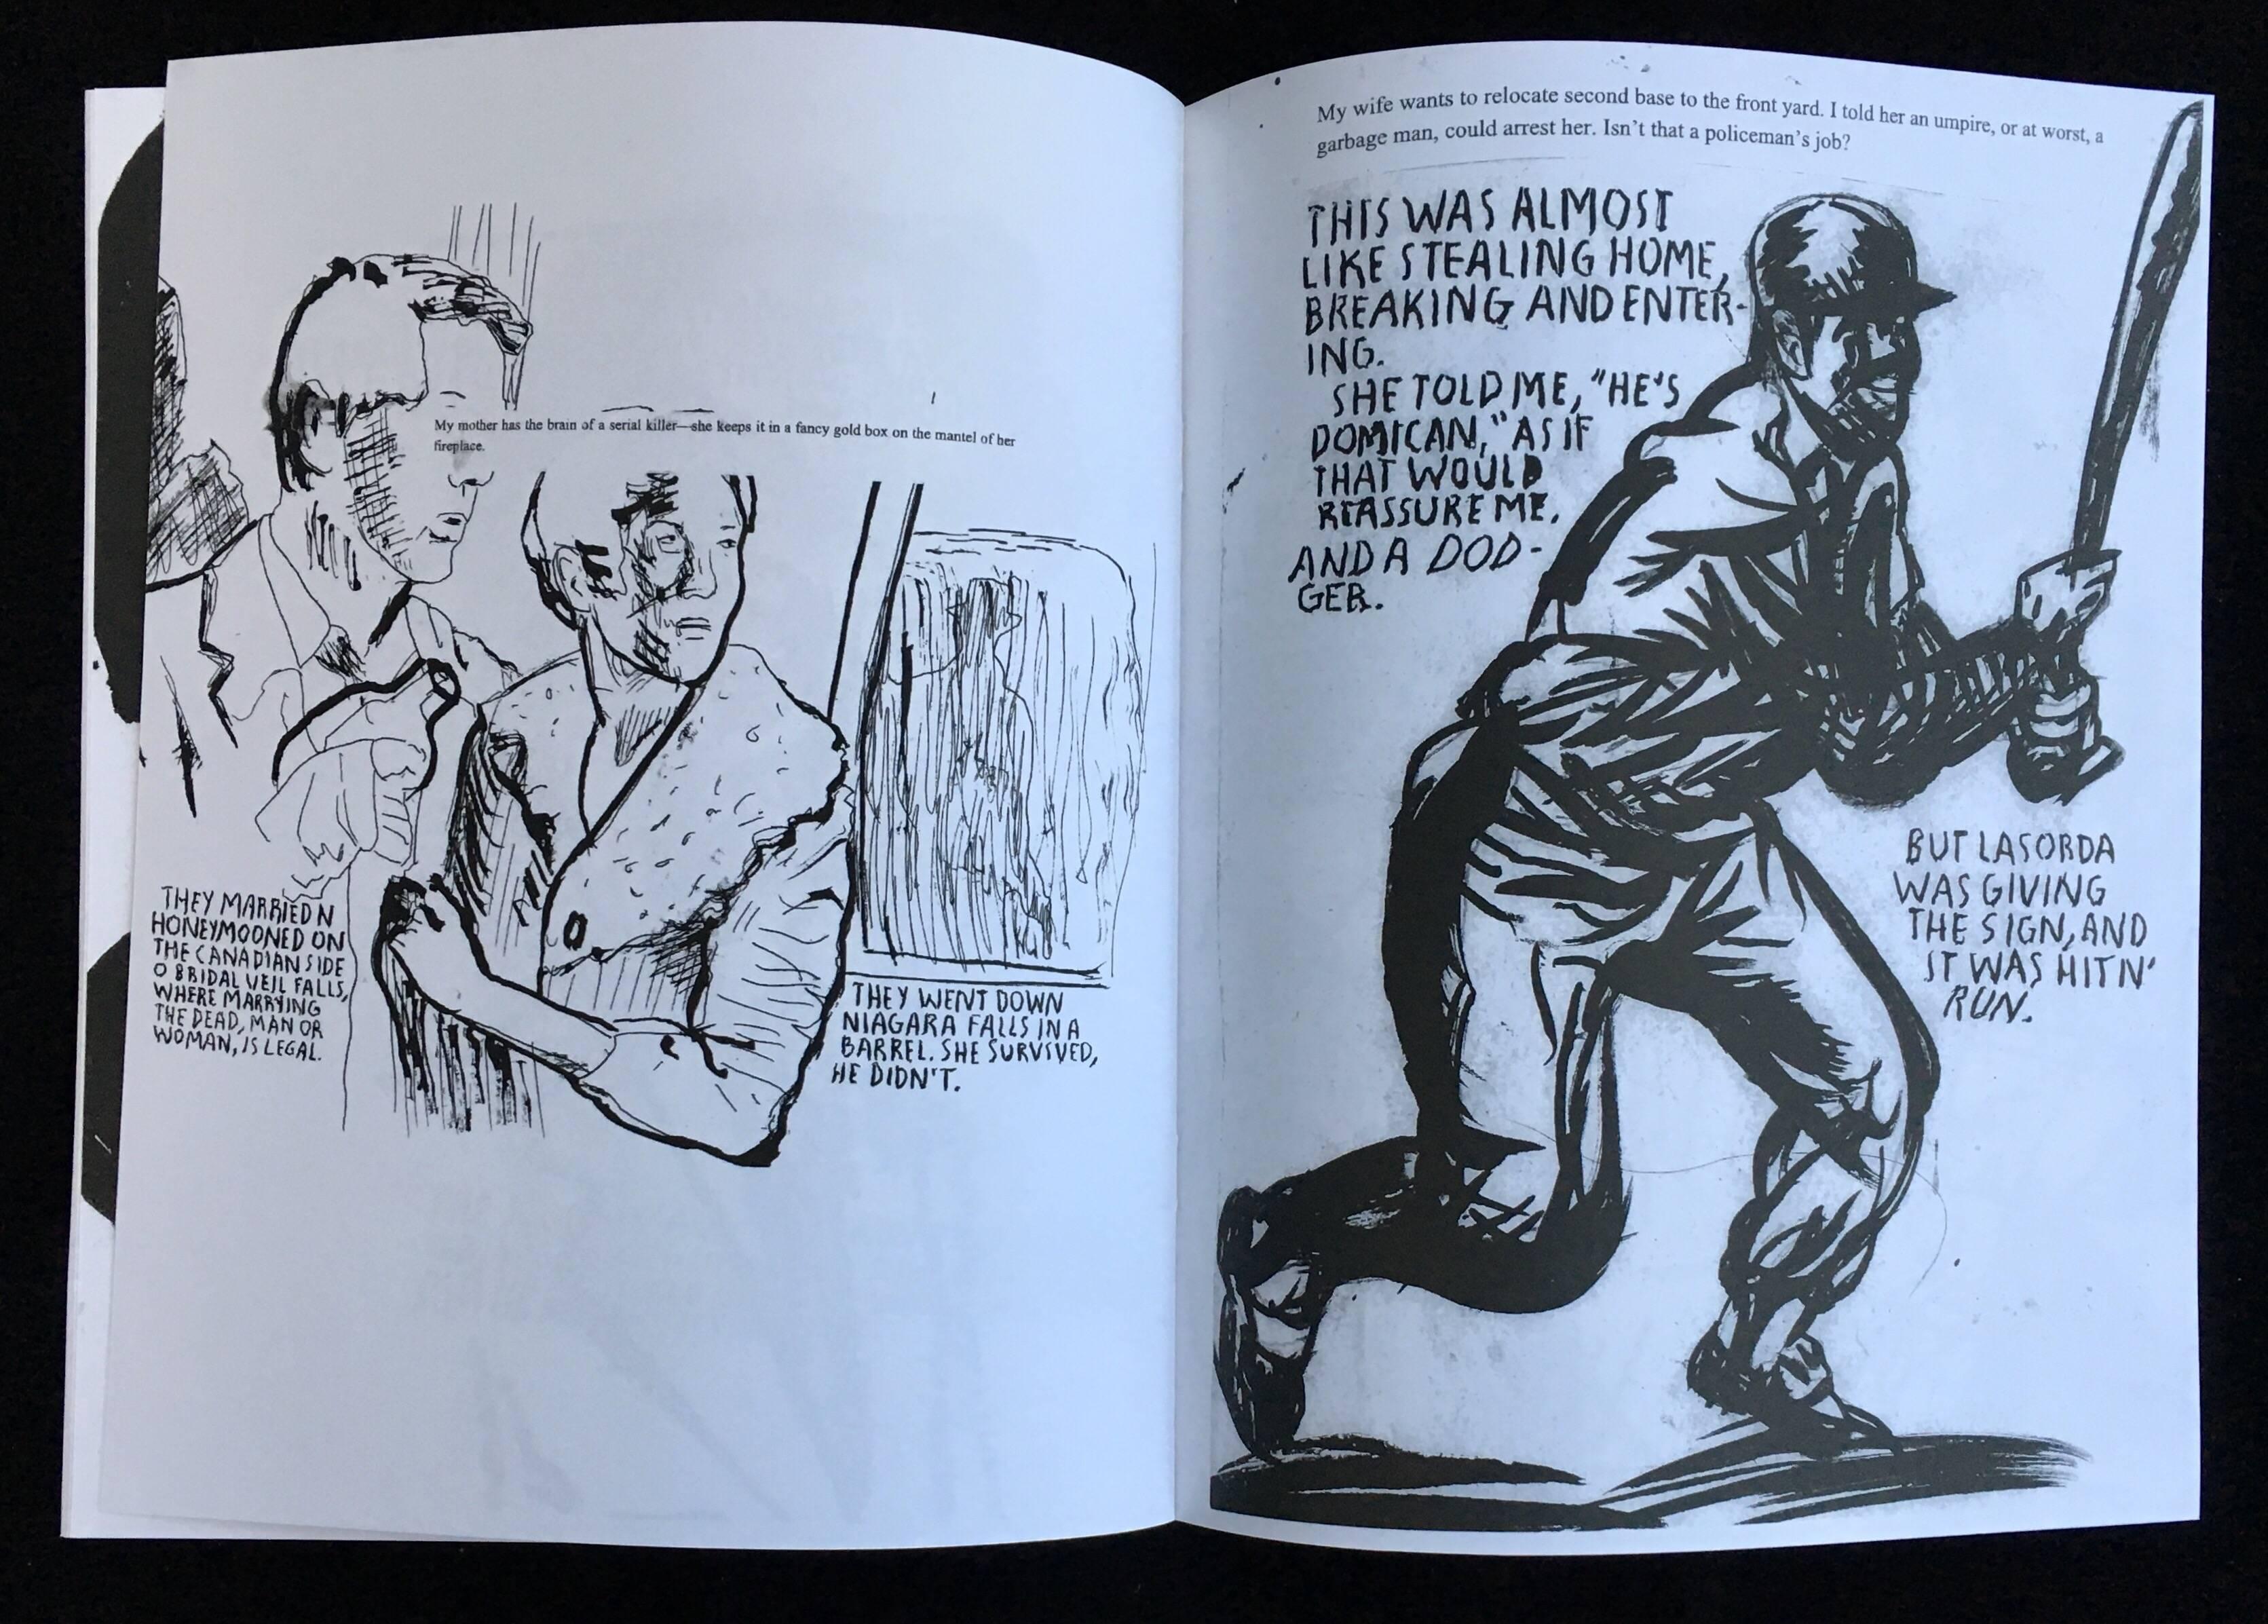 Raymond Pettibon & Mike Topp: Born On A Train 2015
A special, collaborative zine published to coincide with Printed Matter's 2015 New York Art Book Fair. From a sold-out limited edition of 100, signed and numbered by Pettibon.

Artist: Raymond